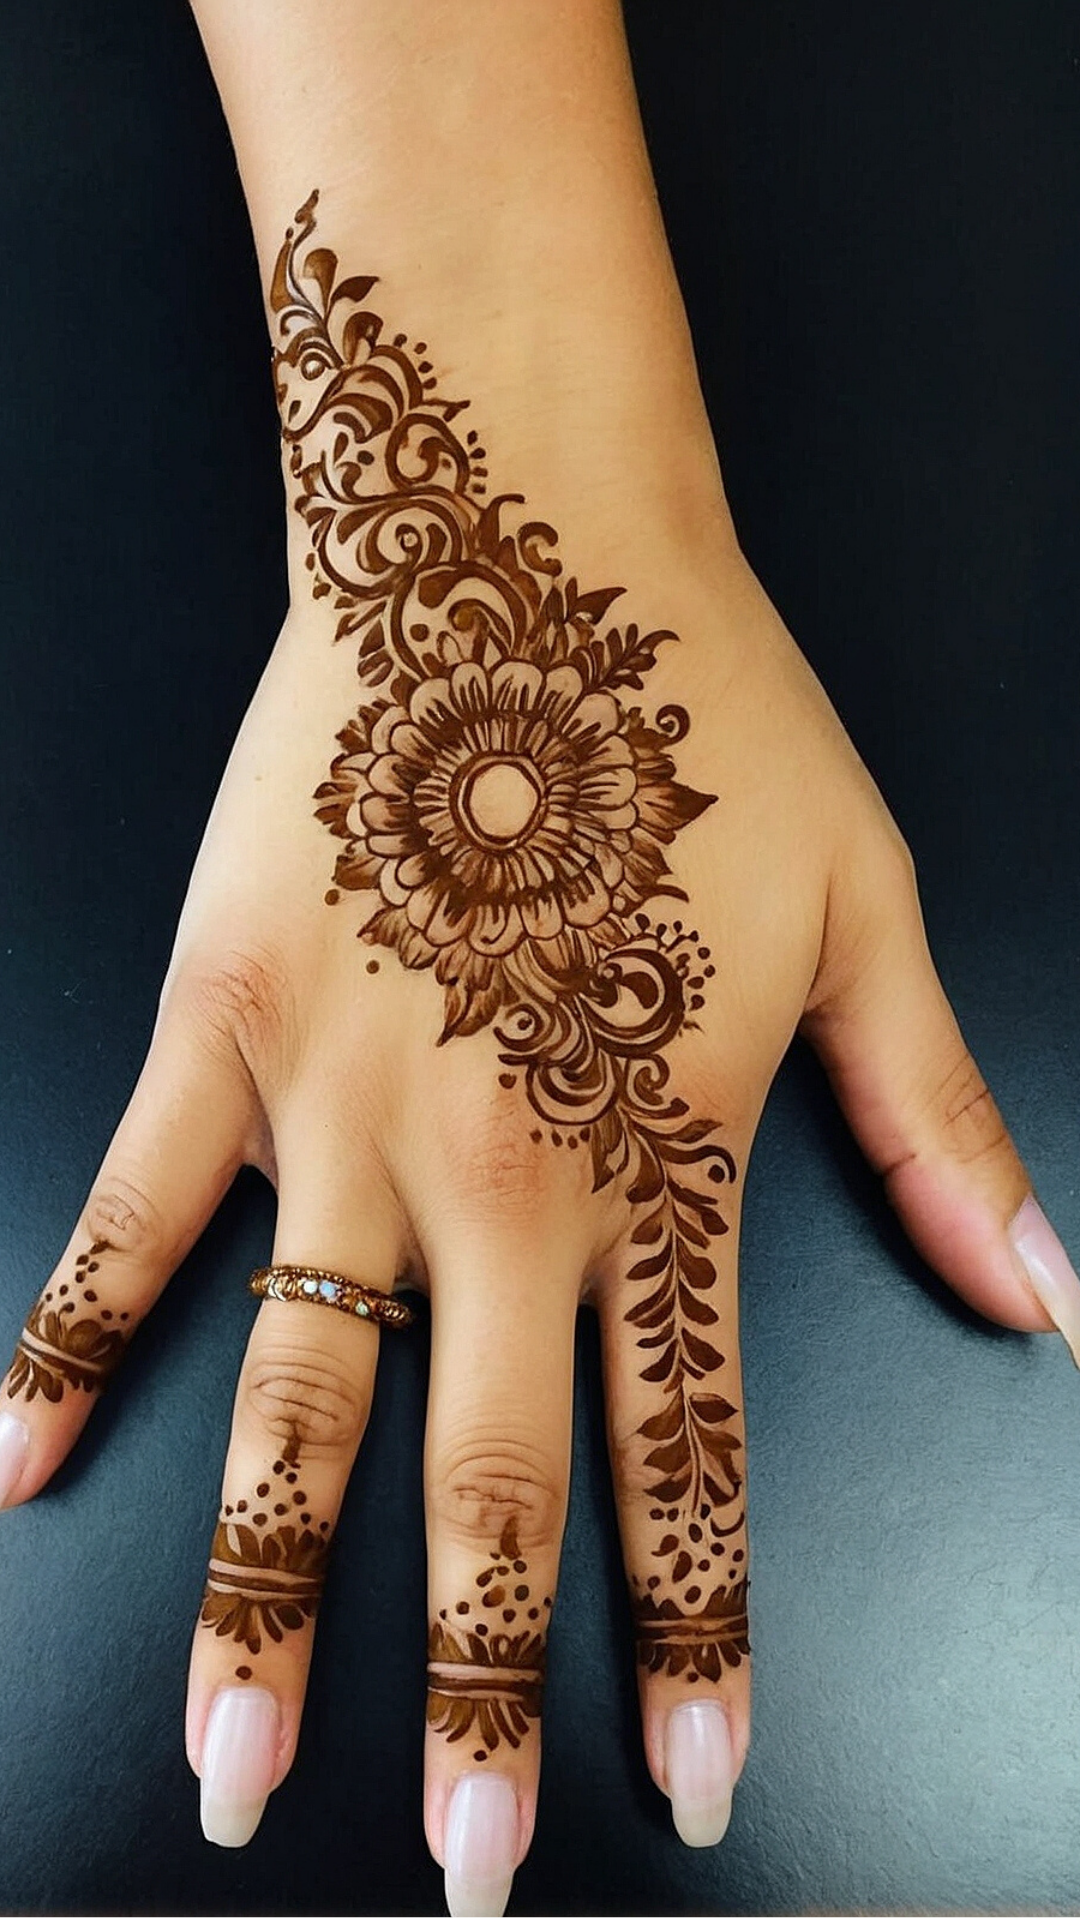 Exotic Blossoms: Henna Designs for the Summer Soul